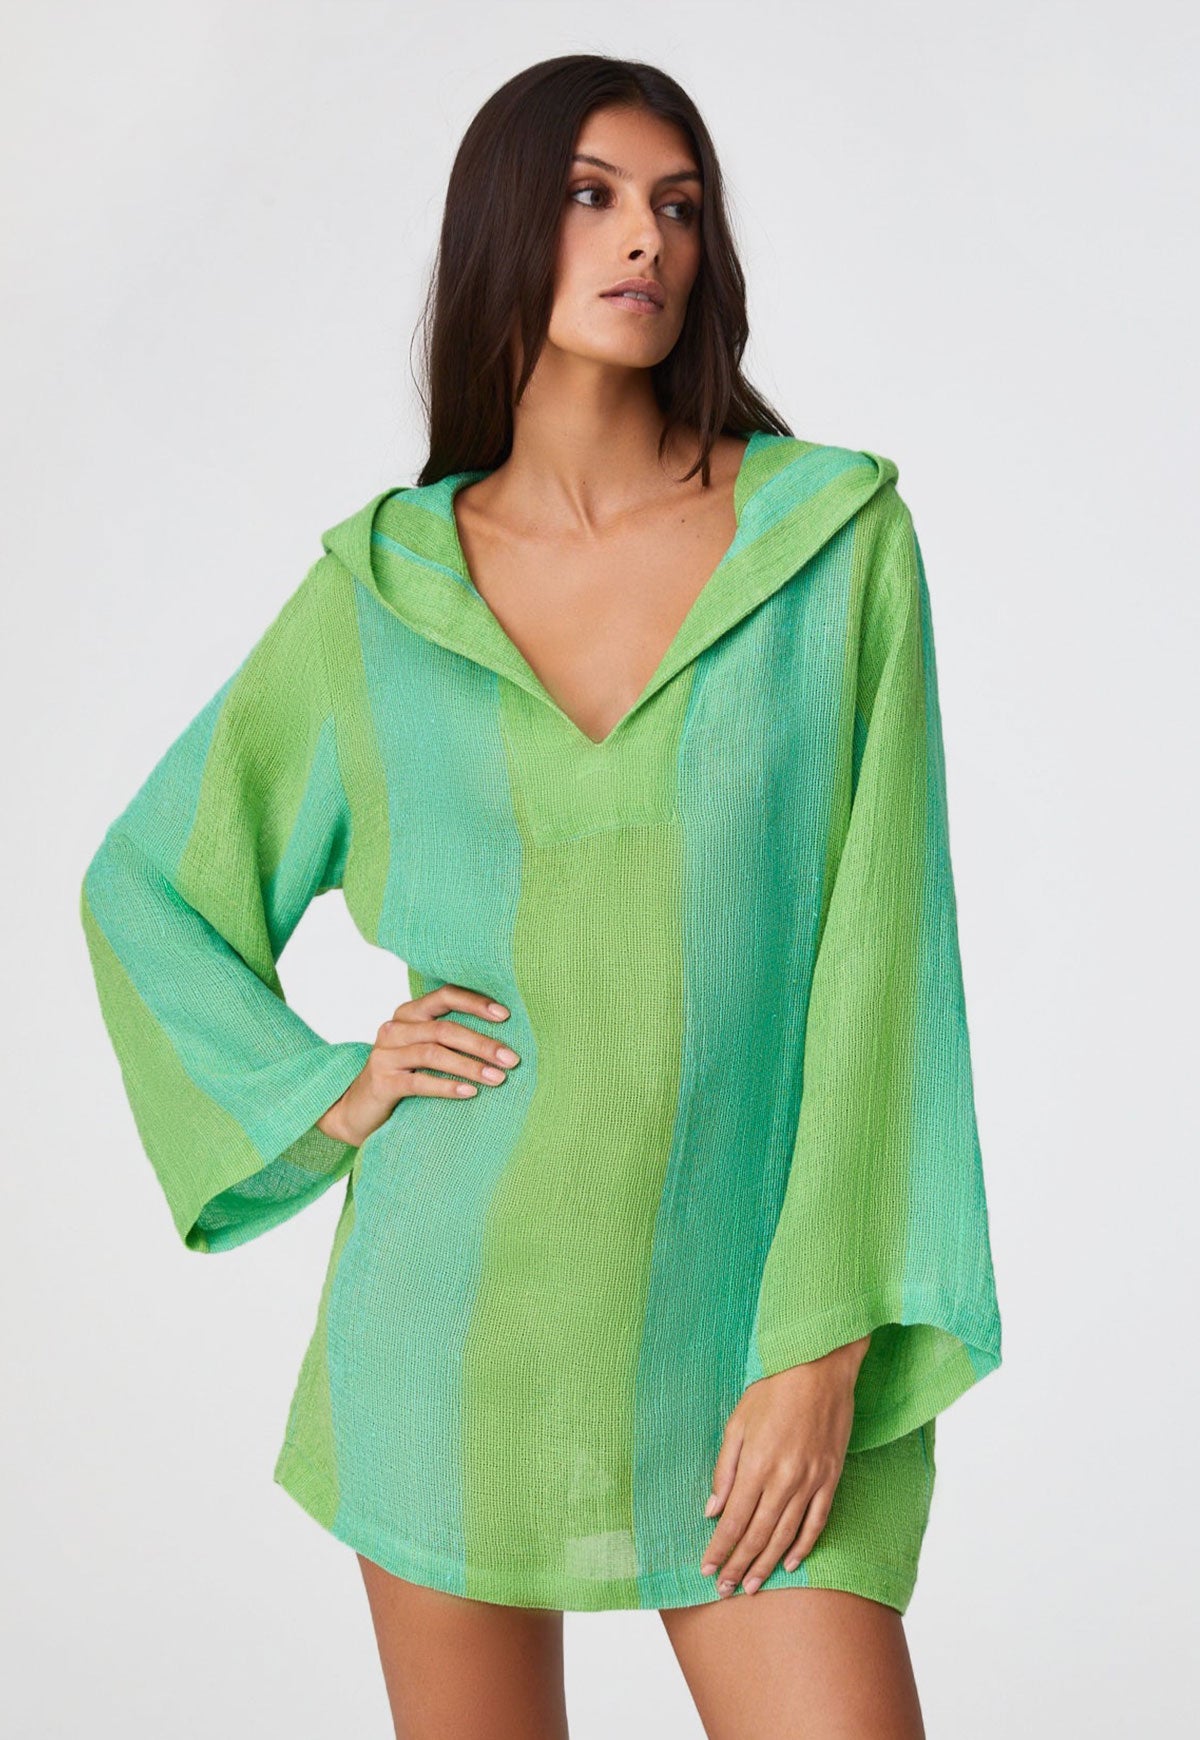 THE BEACH TUNIC in GUAVA AWNING STRIPED GAUZE